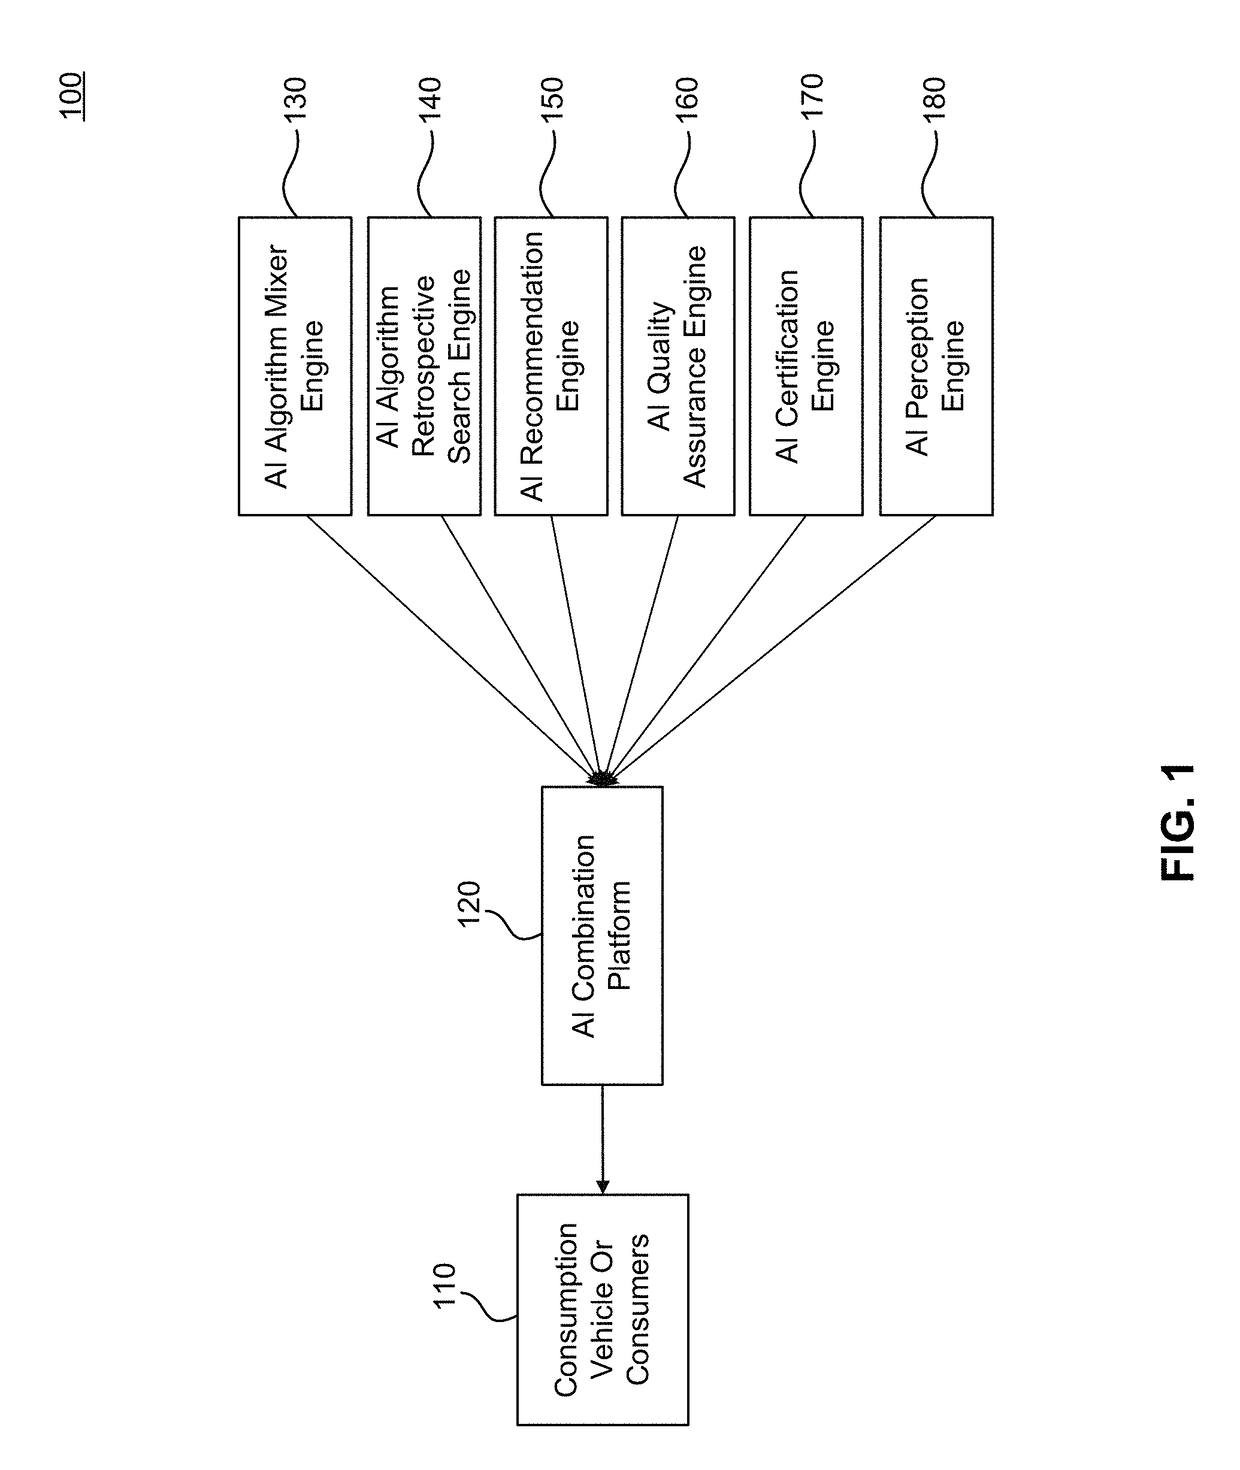 Interchangeable Artificial Intelligence Perception Systems and Methods